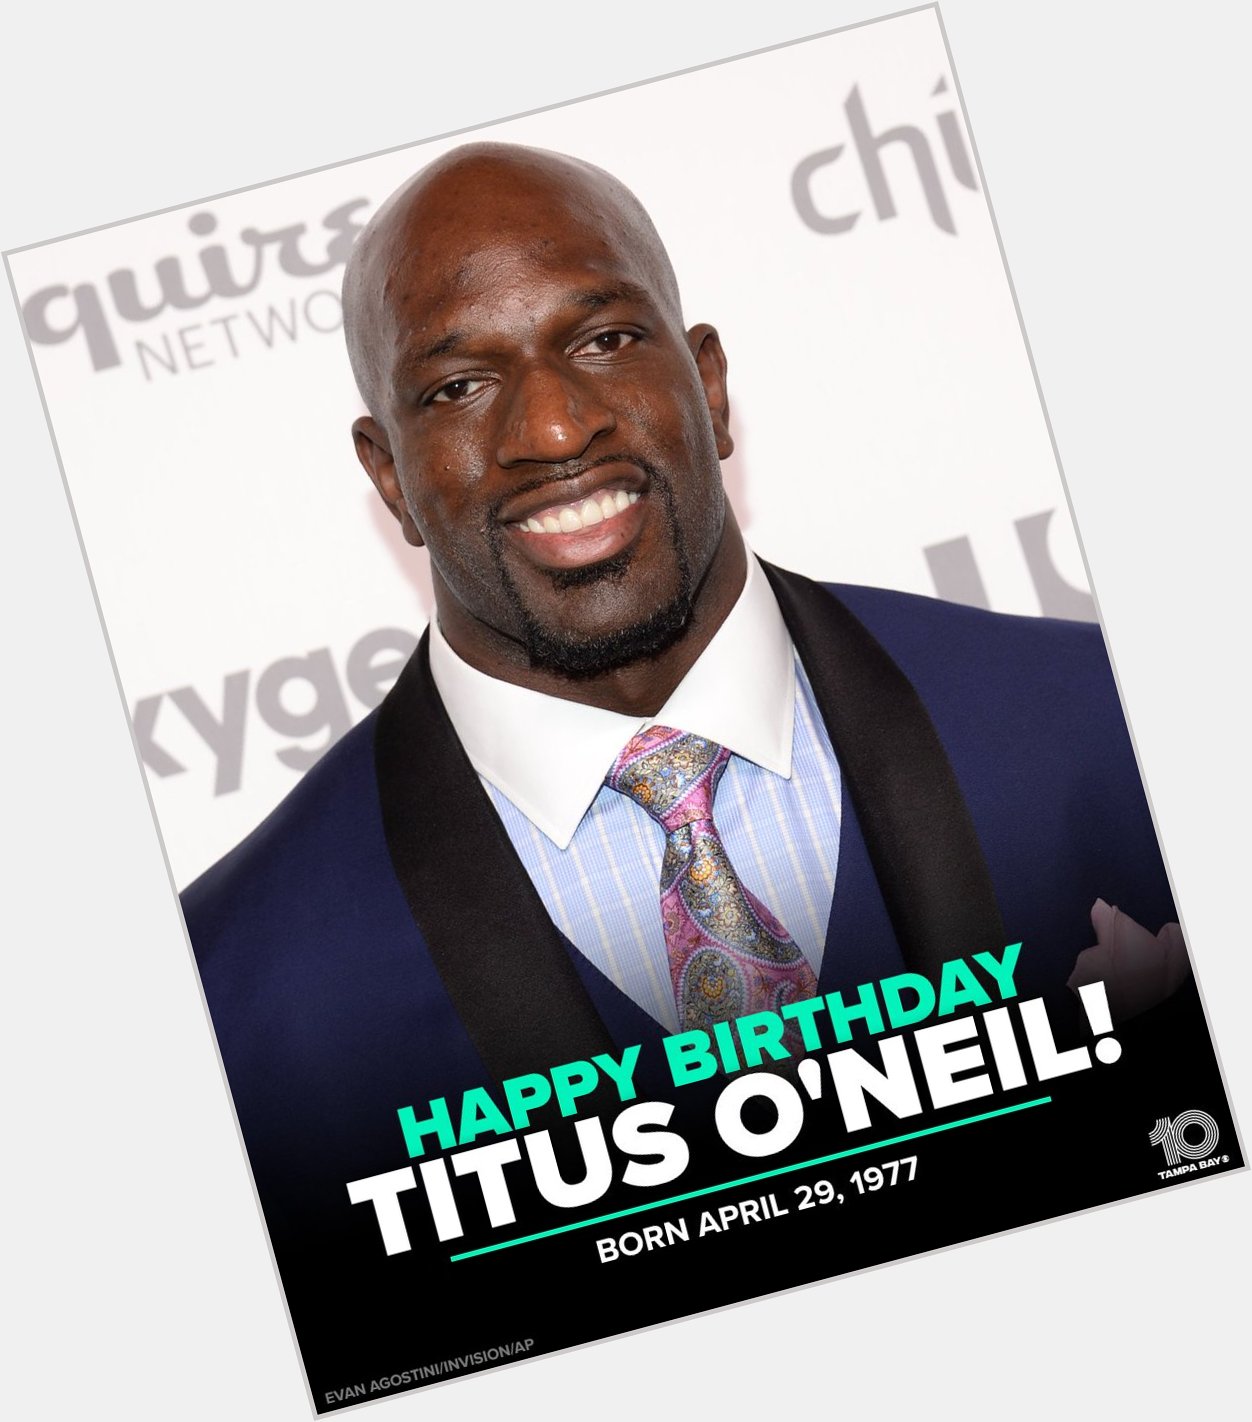 HAPPY BIRTHDAY! Today is the birthday of Tampa resident and WWE Superstar Titus O\Neil! 